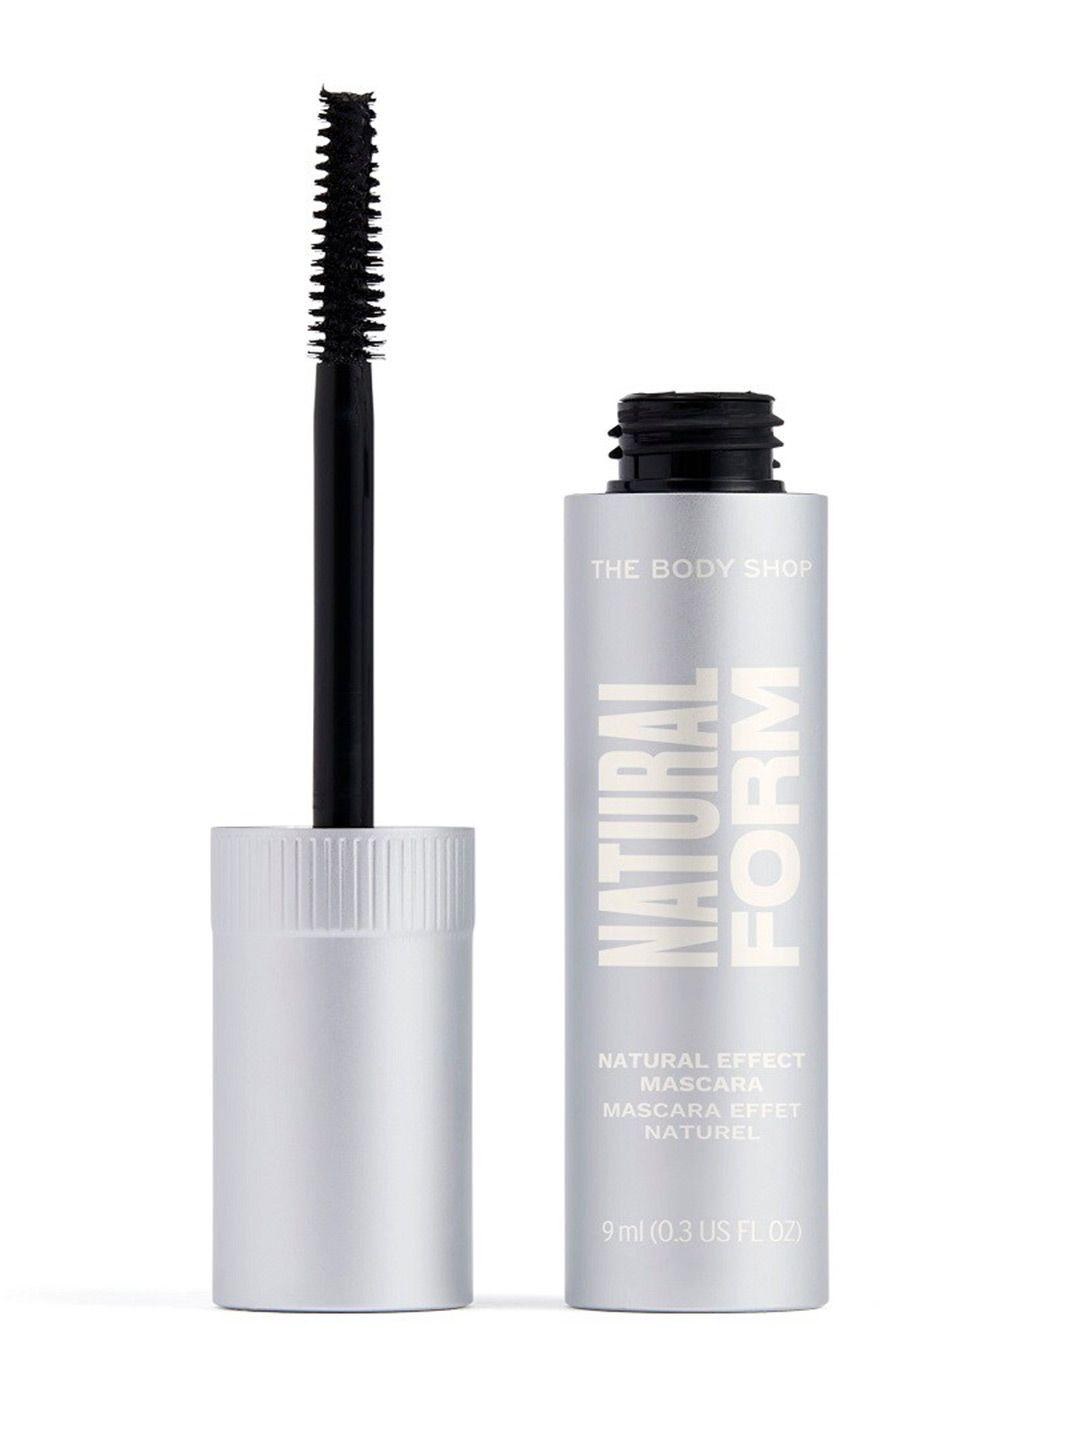 the body shop natural form smudge proof natural effect mascara 9ml - black